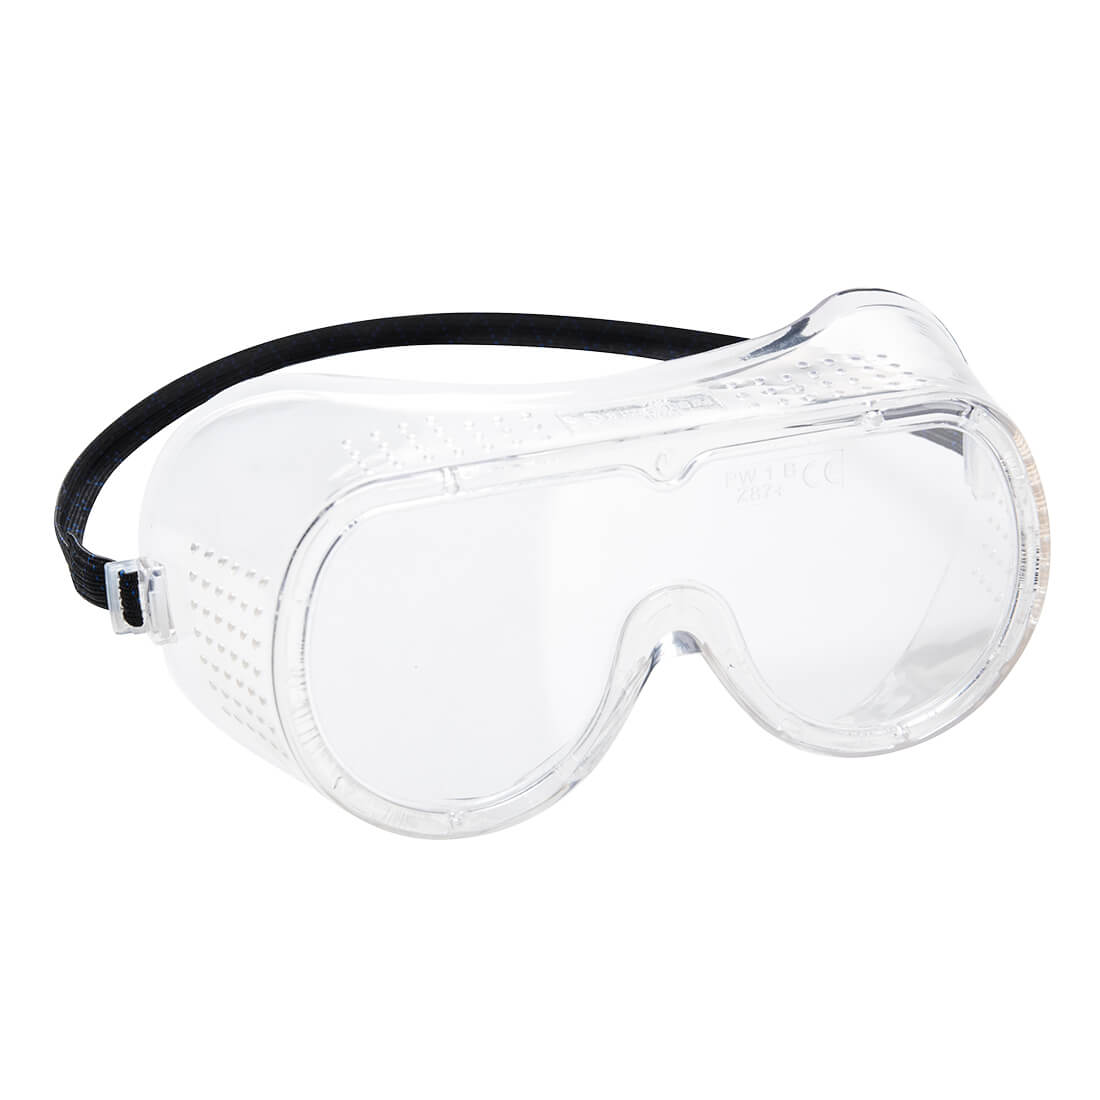 Eye Protection, Safety Goggles